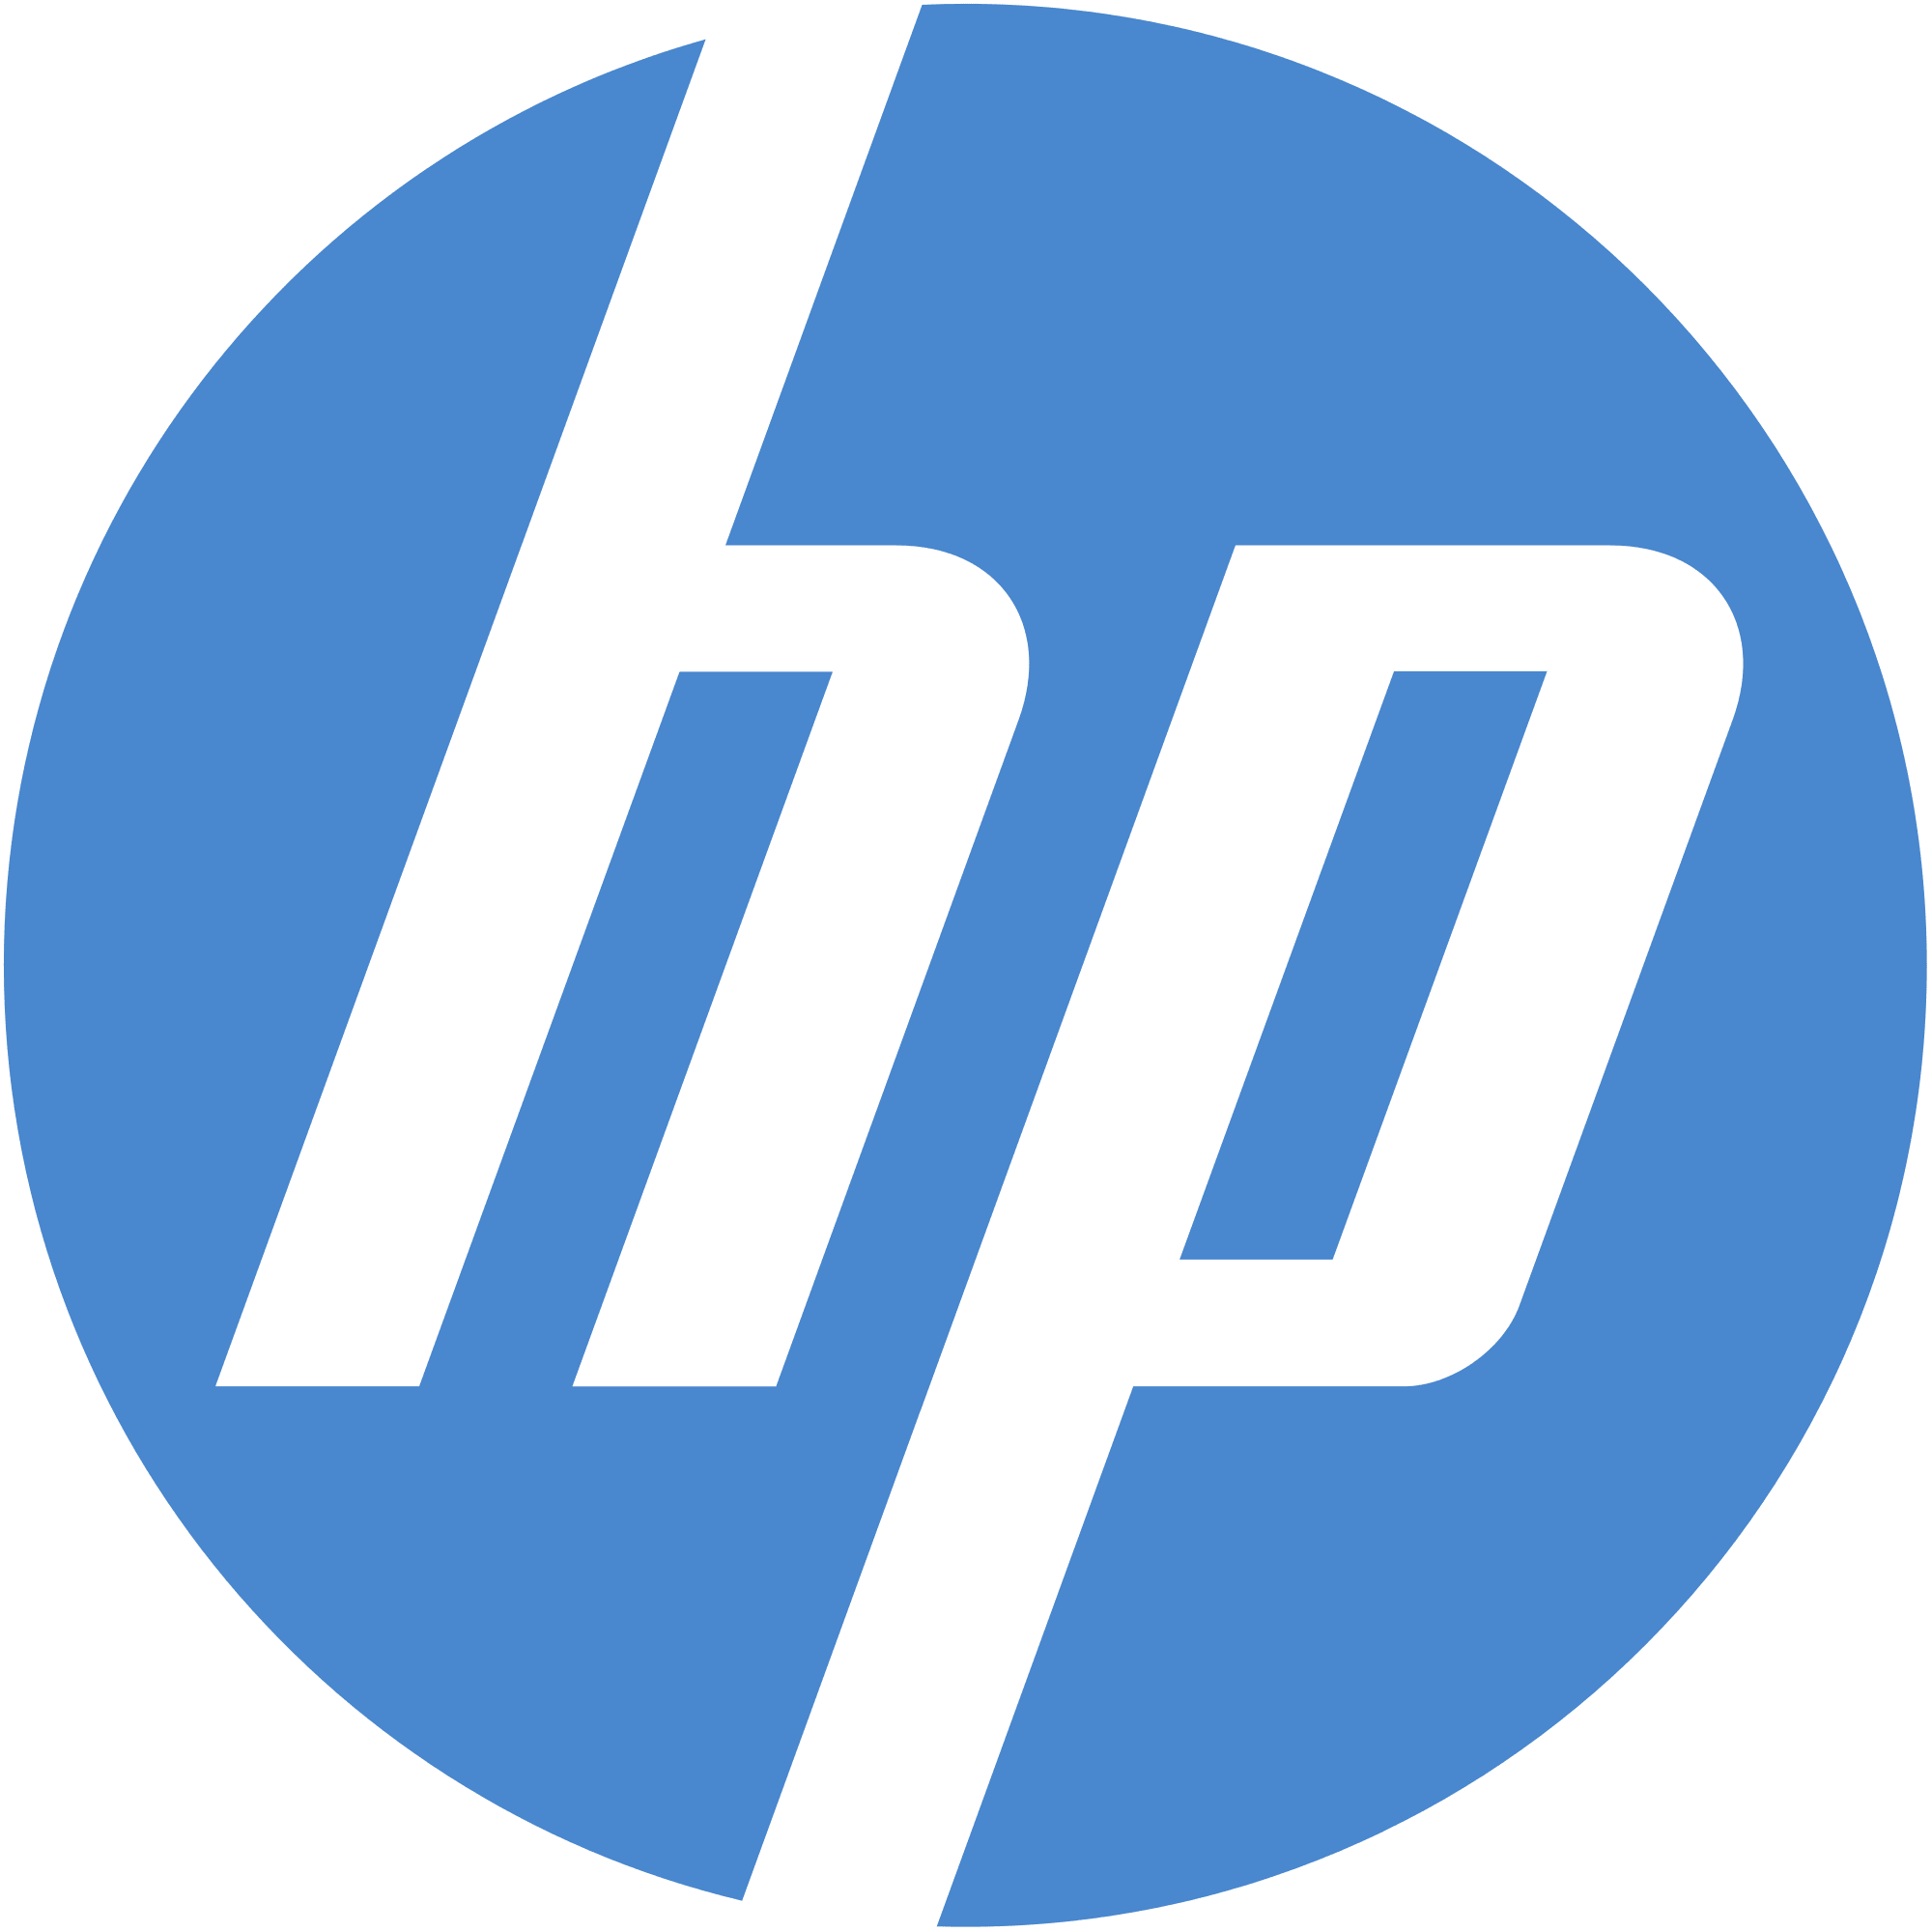 hp officejet pro 8600 download for mac os x